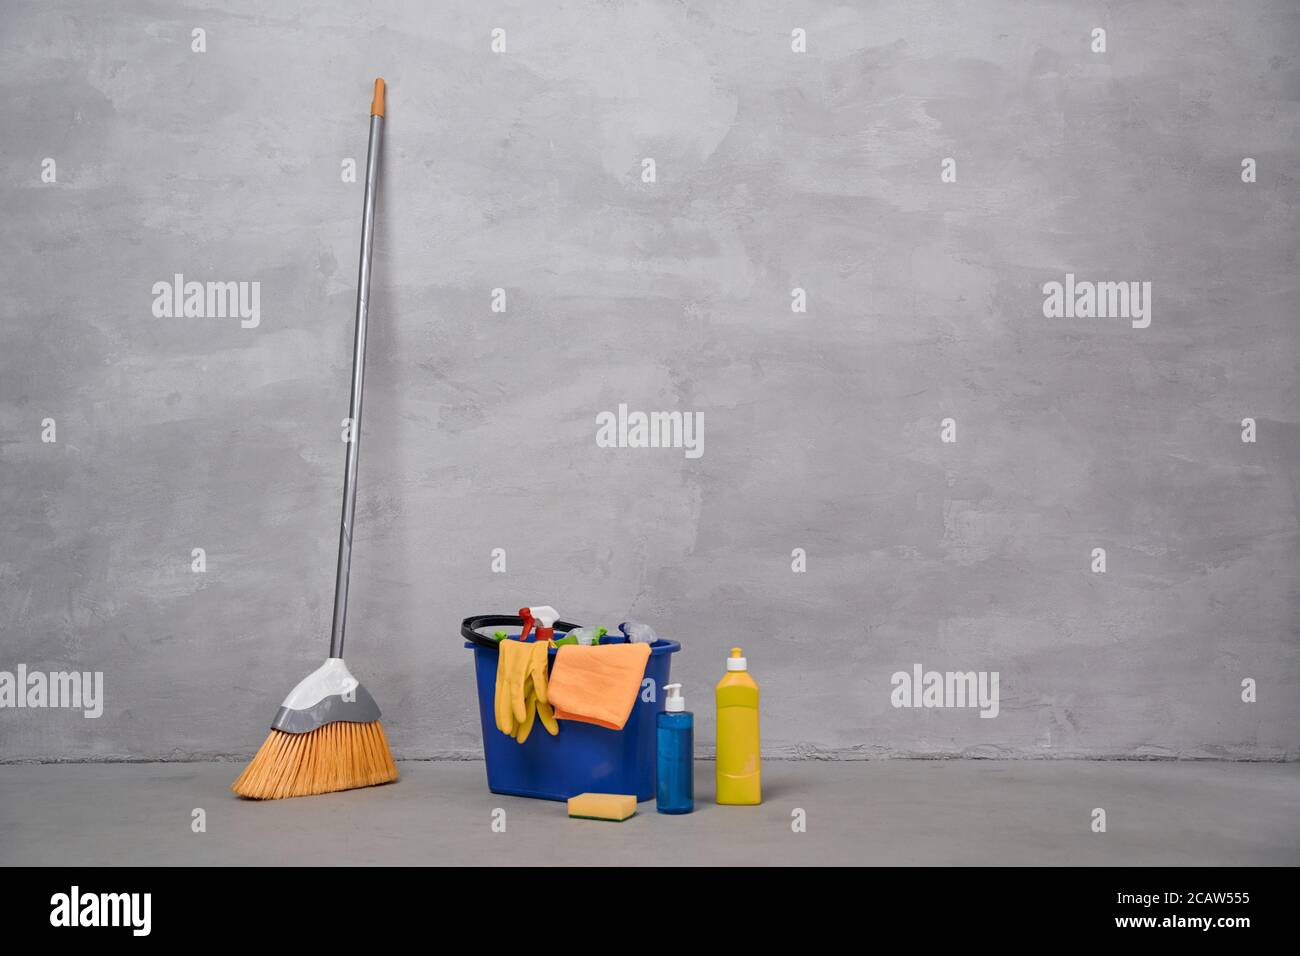 Cleaning equipment. Broom and plastic bucket or basket with cleaning products, bottles with detergents standing on the floor against grey wall. Housework, cleaning, housekeeping concept Stock Photo